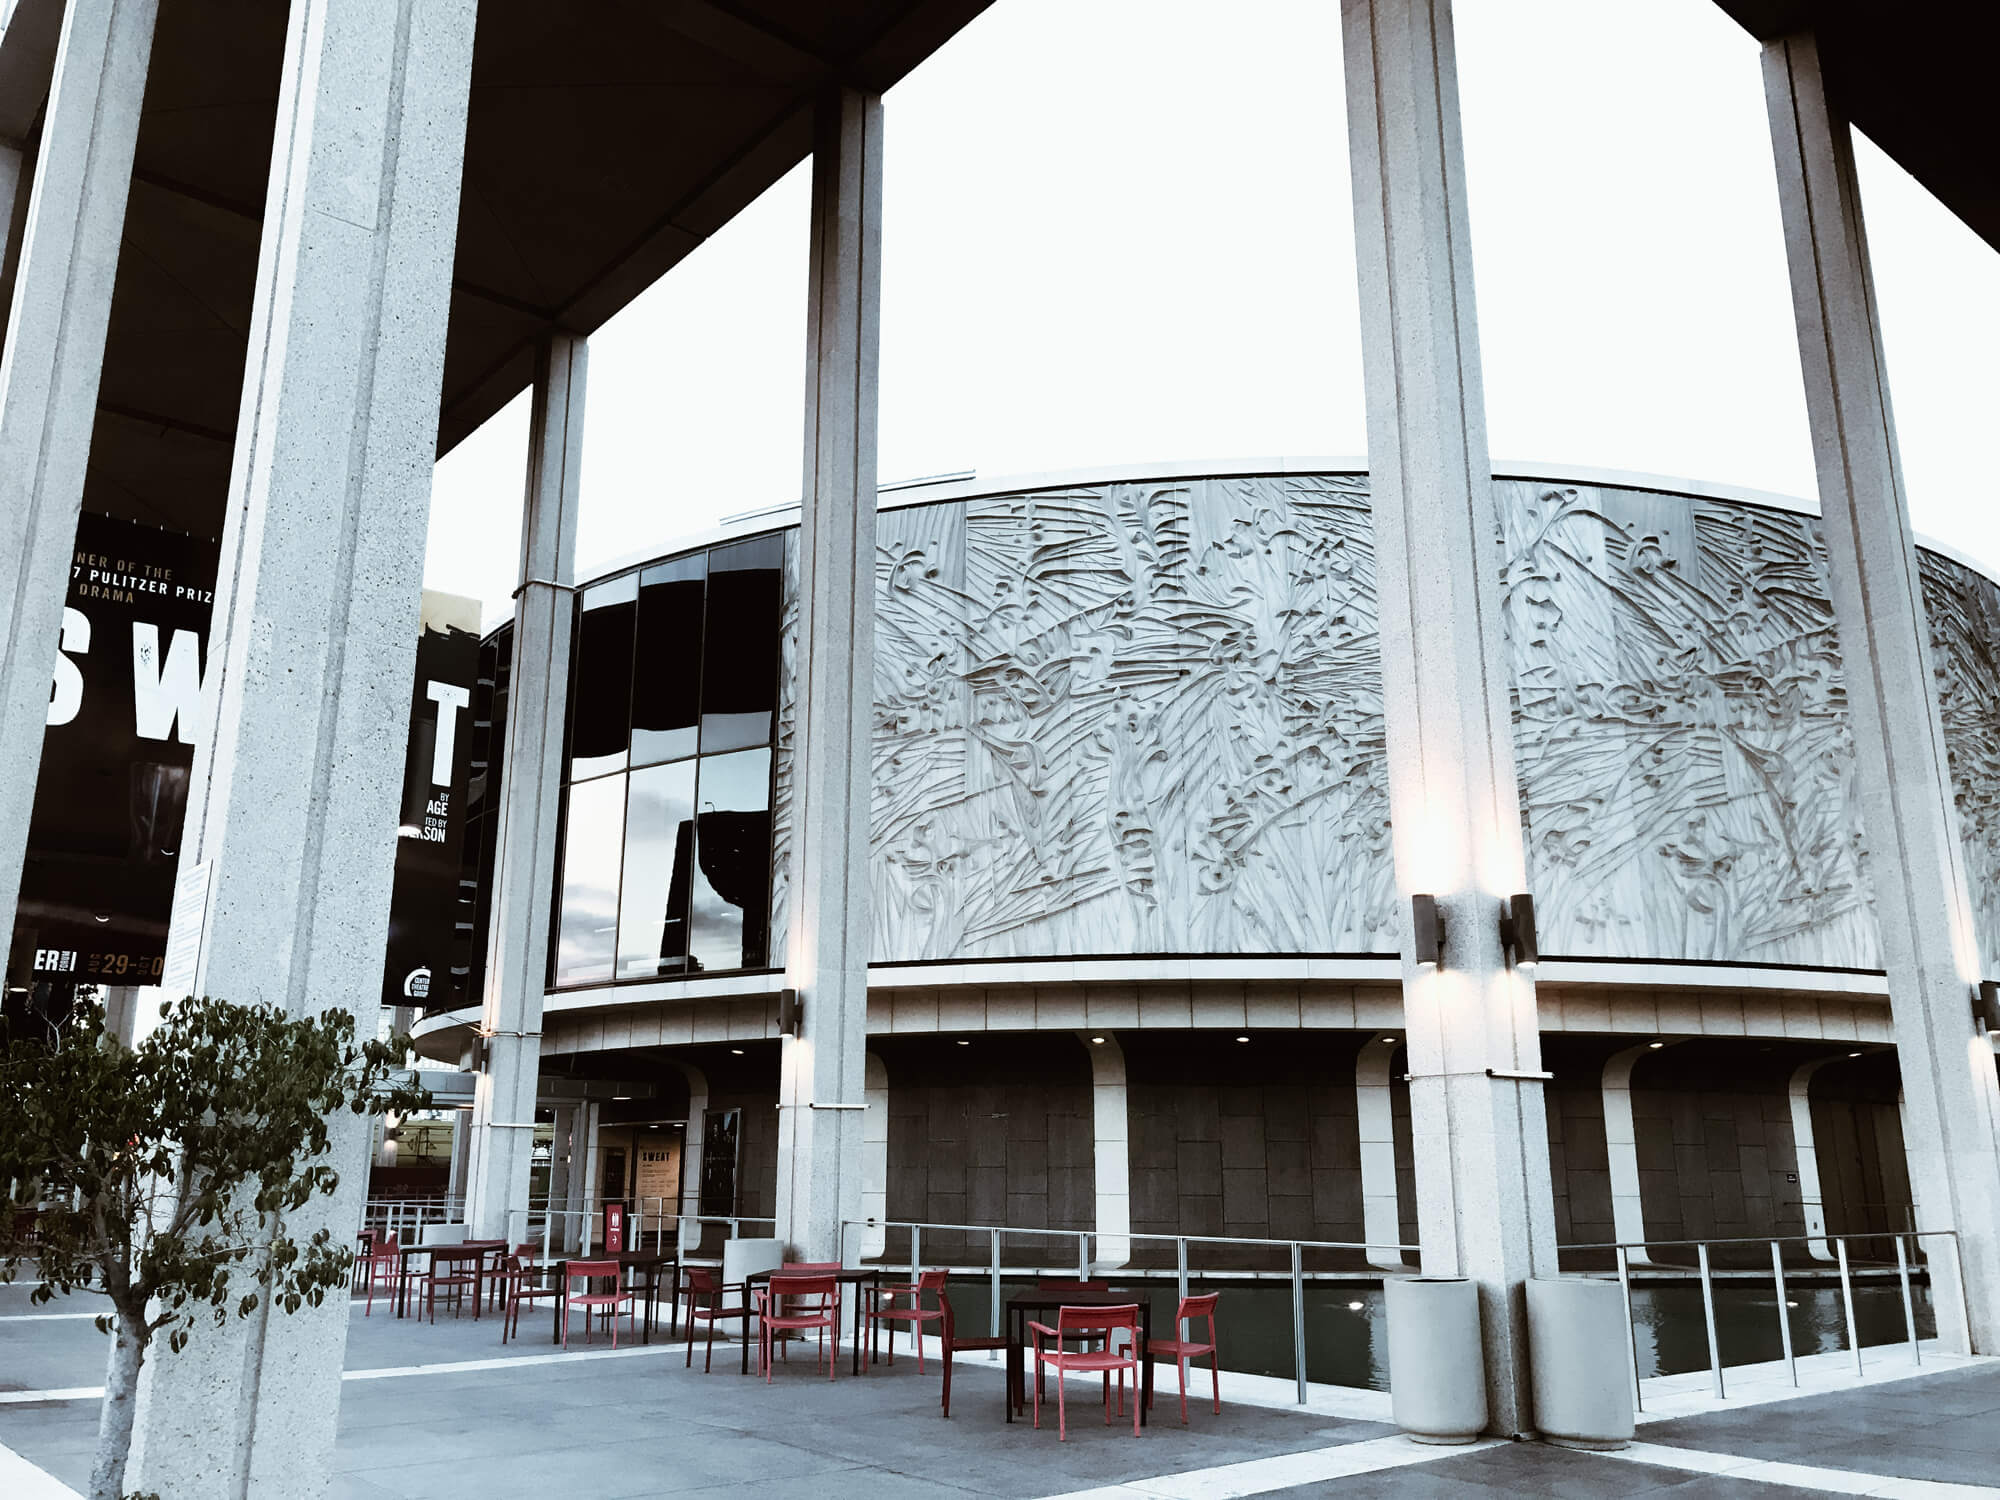 The County of Los Angeles – Mark Taper Forum 2